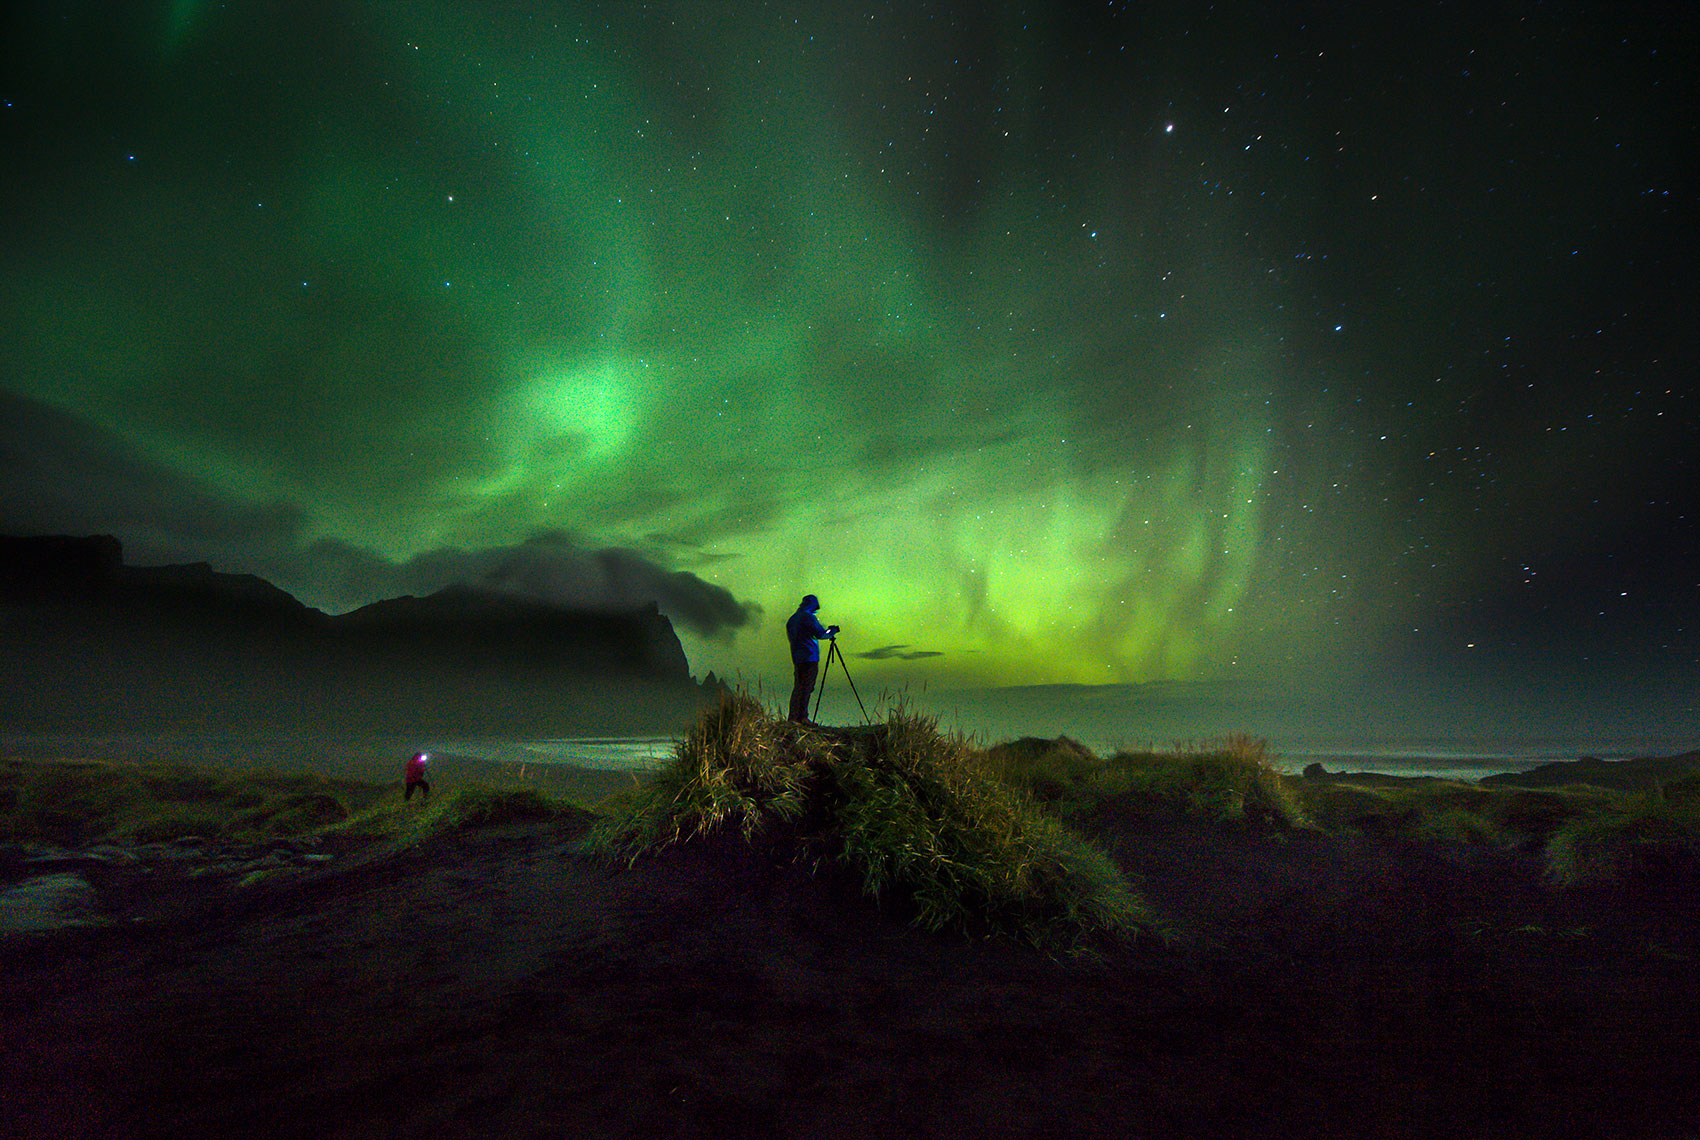 Photographer with camera on tripod photographs the northern lights in Iceland